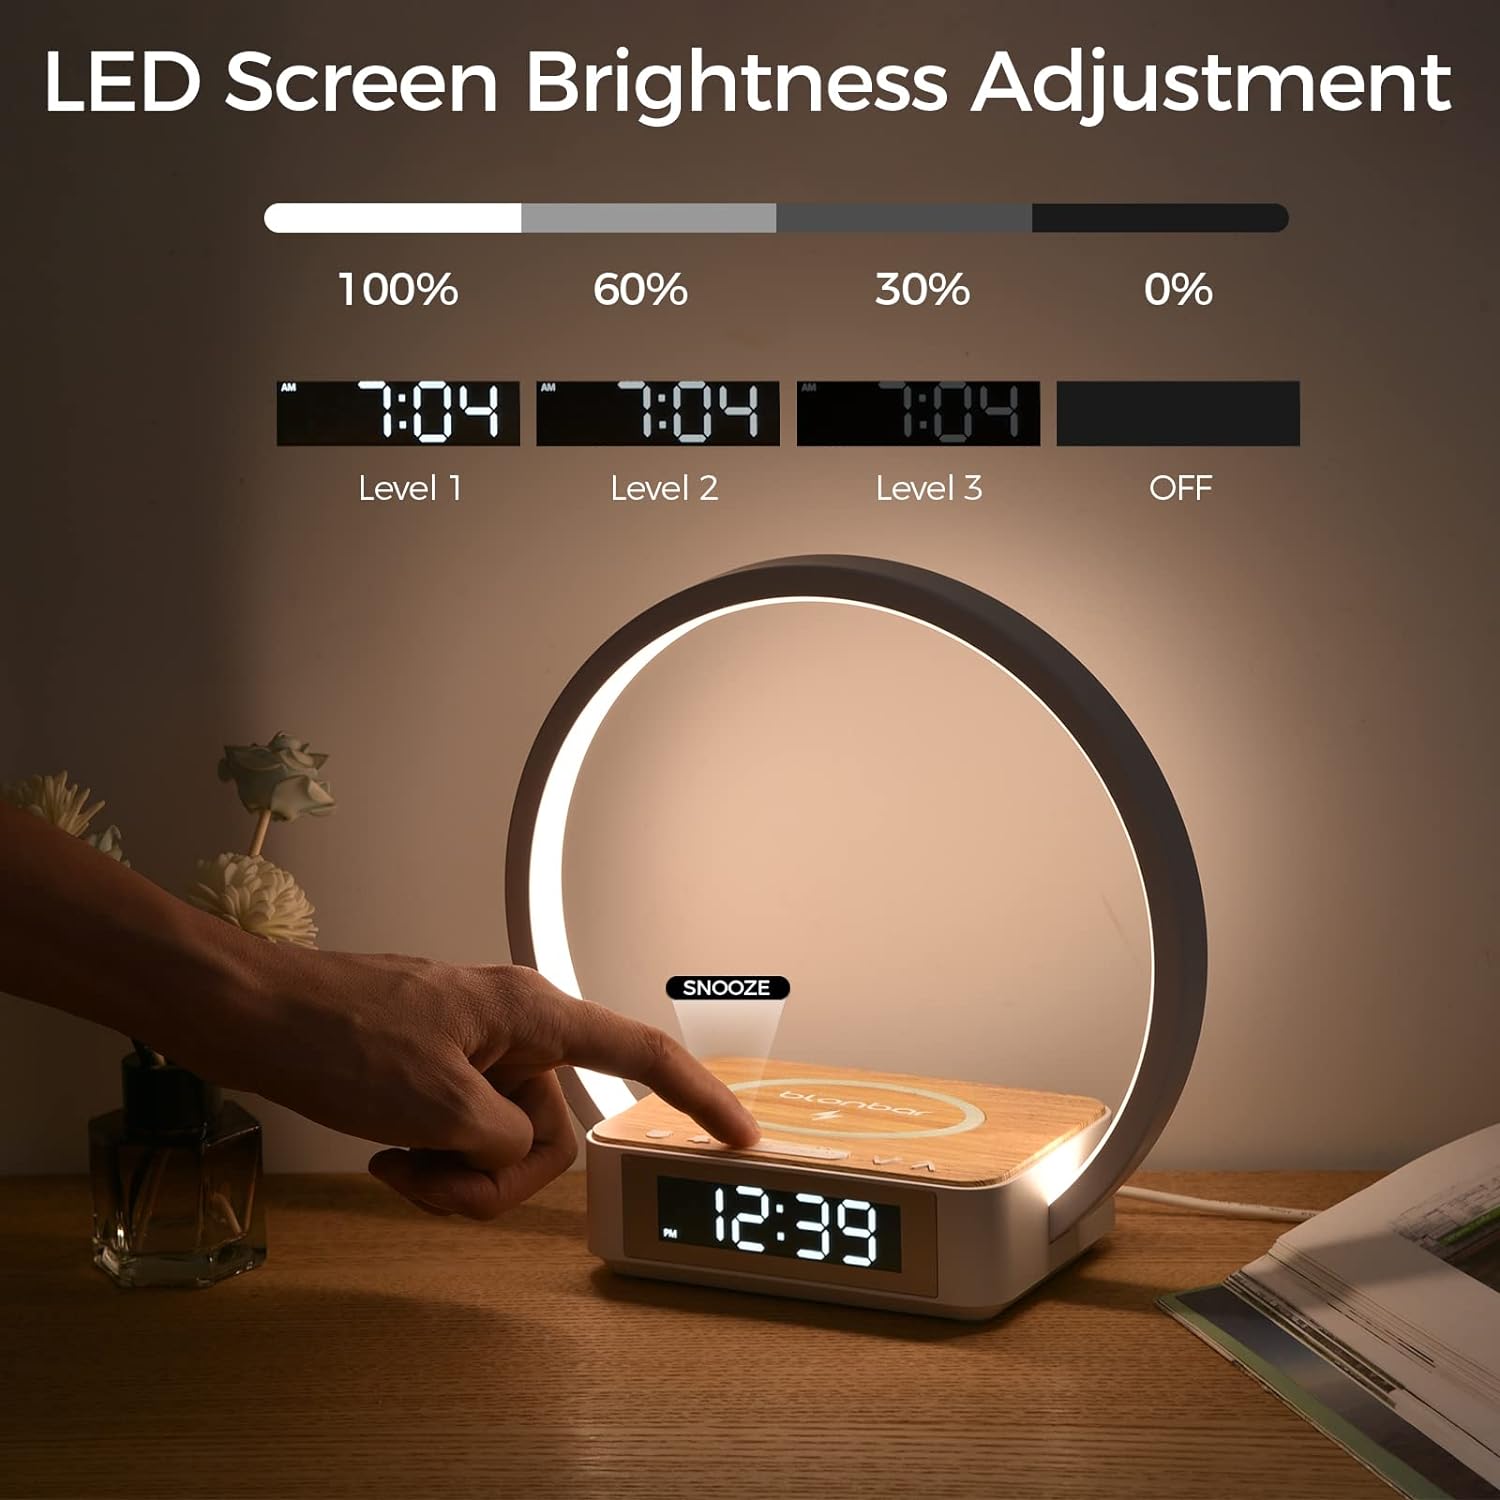 G-OUSSVE｜Bedside Lamp Qi Wireless Charger LED Desk Lamp with Alarm Clock, Touch Control 3 Light Hues, 10W Max Wireless Charging Table Lamp，Eye-Caring Reading Light for Kids, Adults, Home.